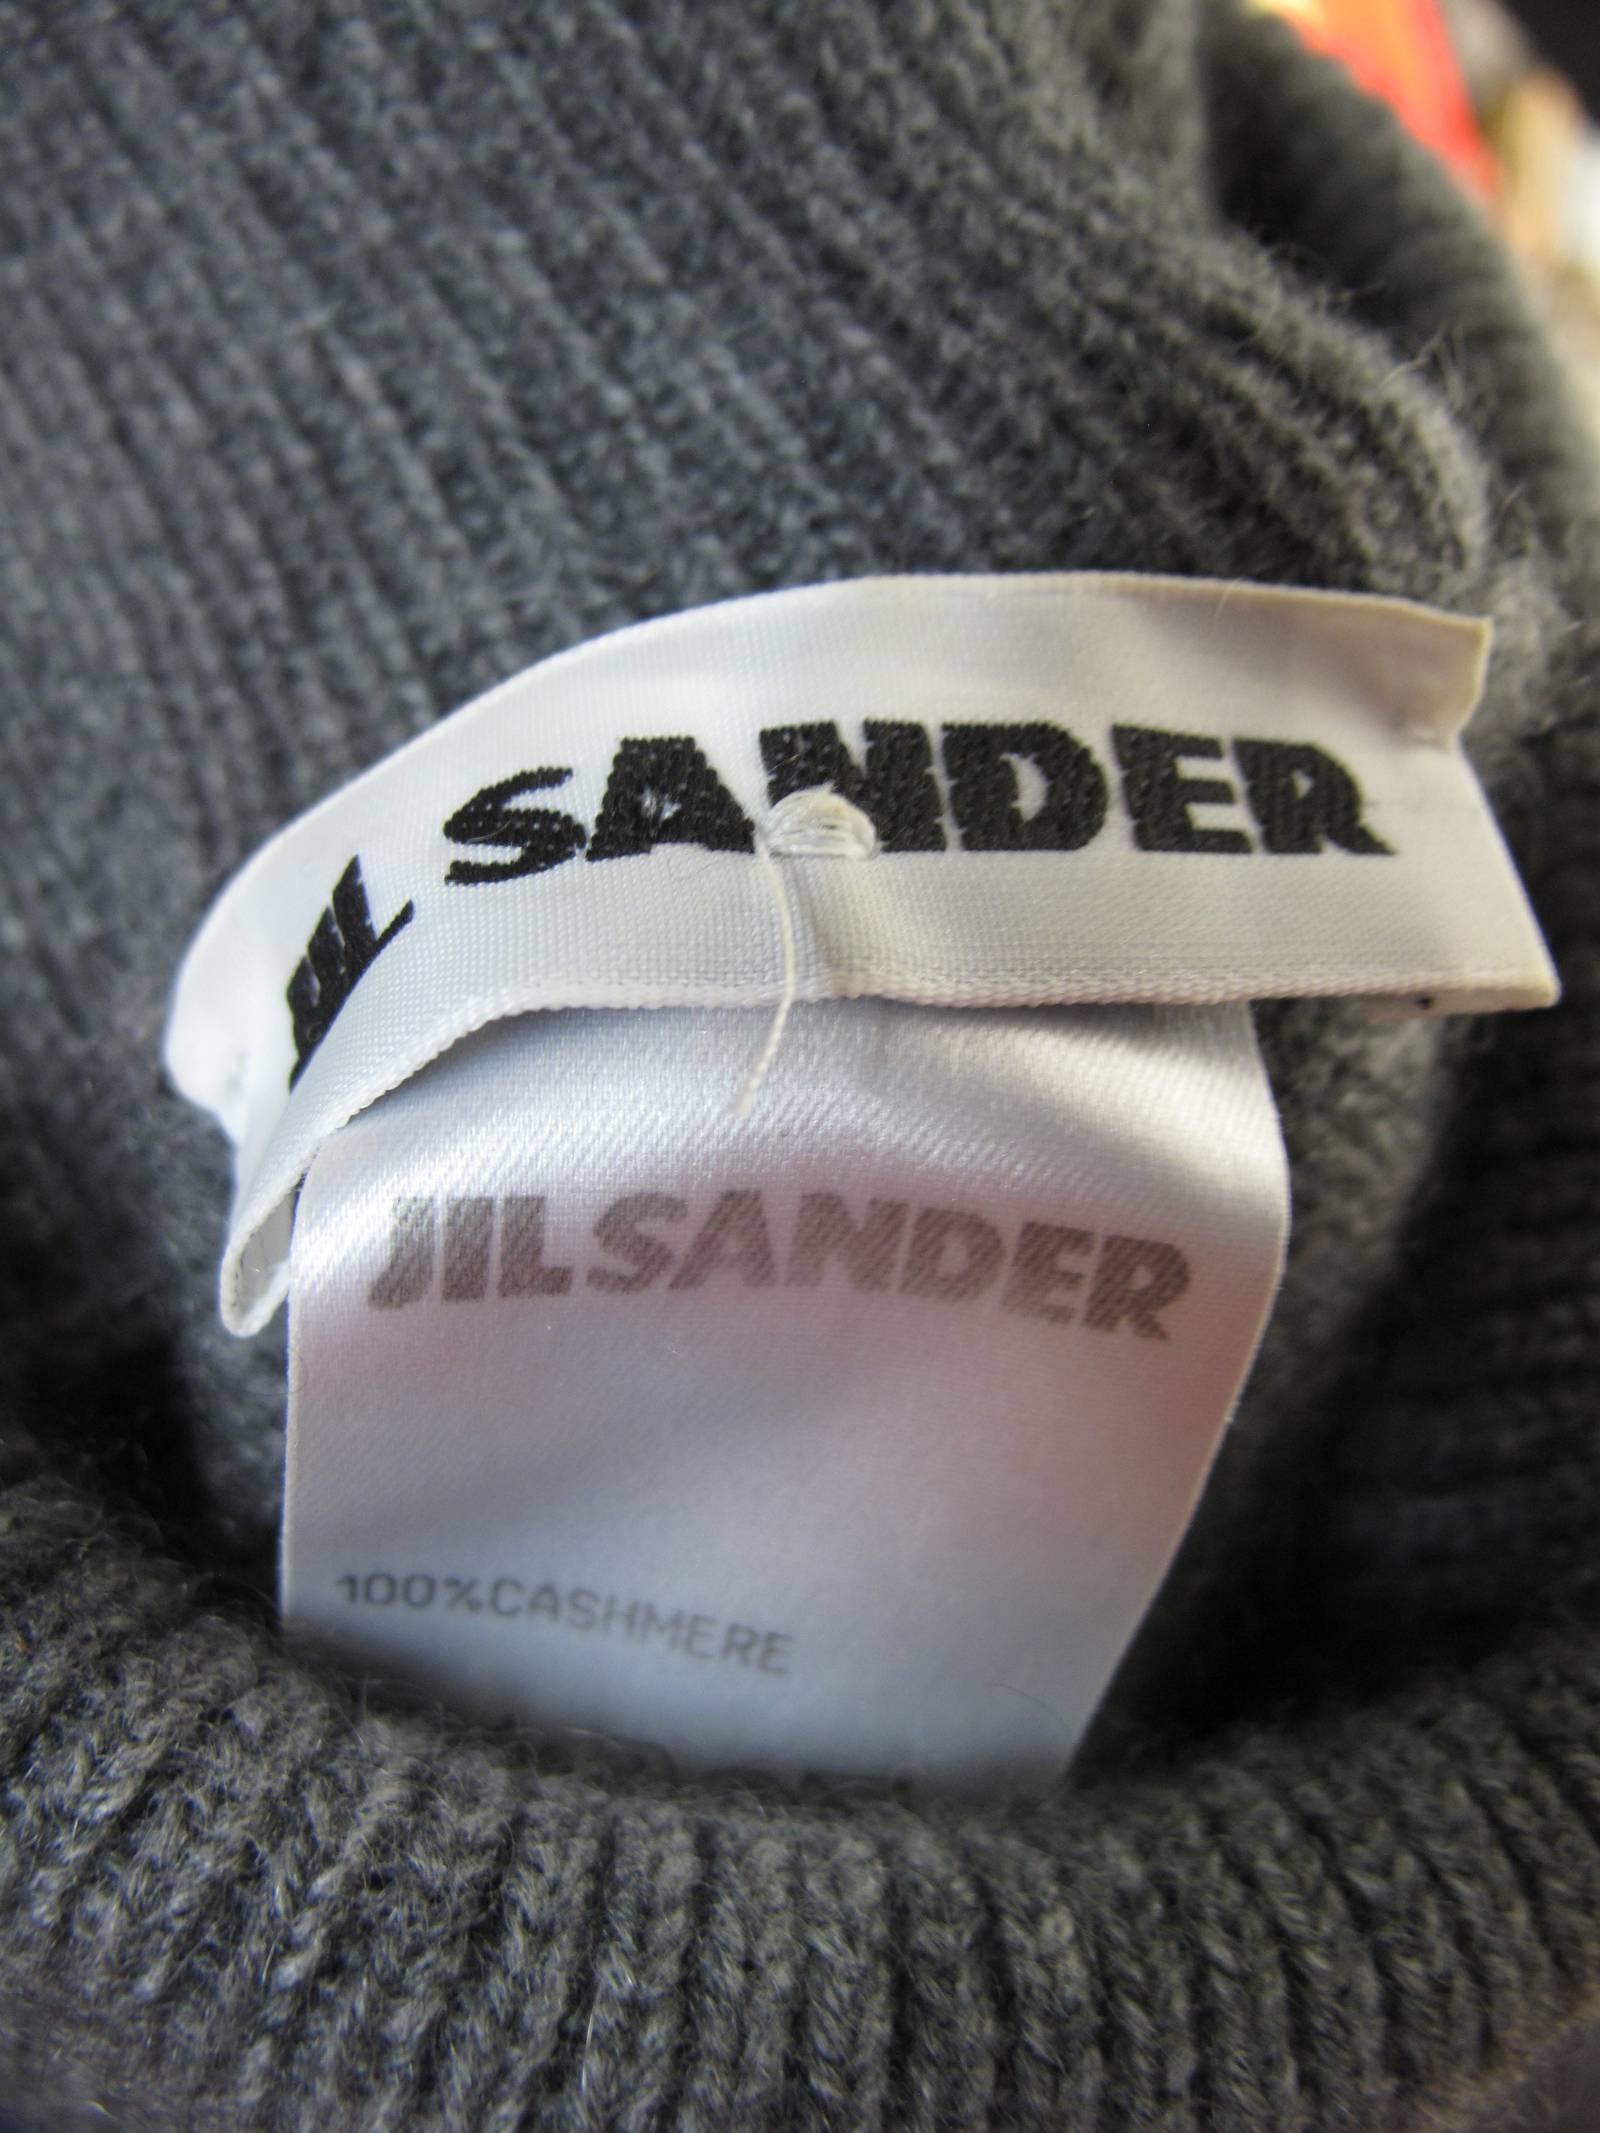 Jil Sander Grey and light grey cashmere sweater.  Condition: Excellent. Size 40
We accept returns for refund, please see our terms.  We offer free ground shipping within the US.  Please let us know if you have any questions. 